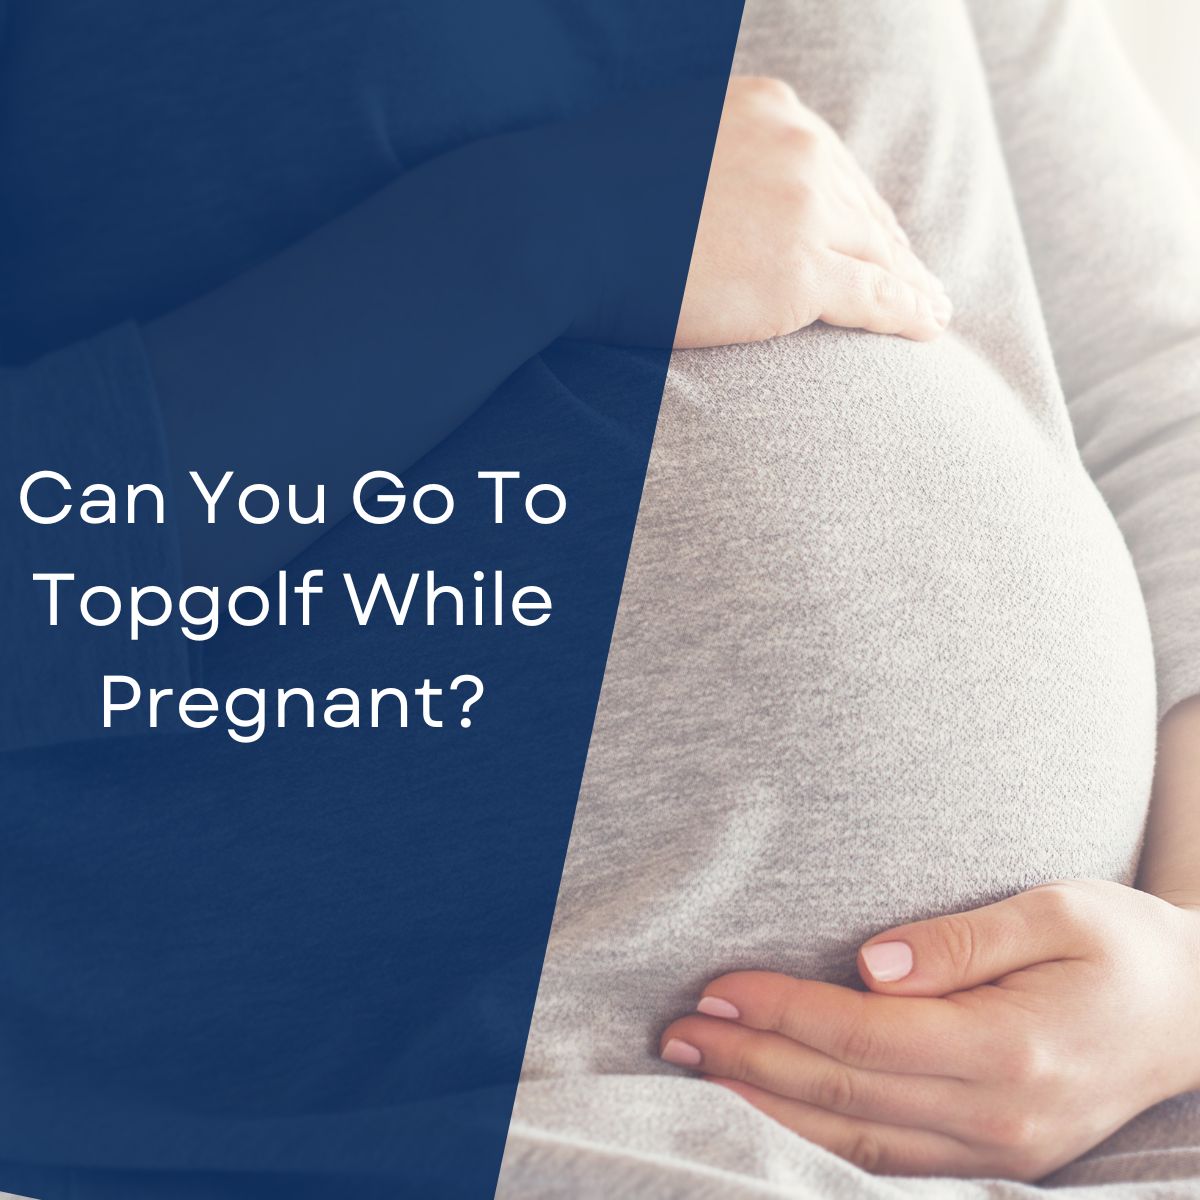 Can You Go To Topgolf While Pregnant?